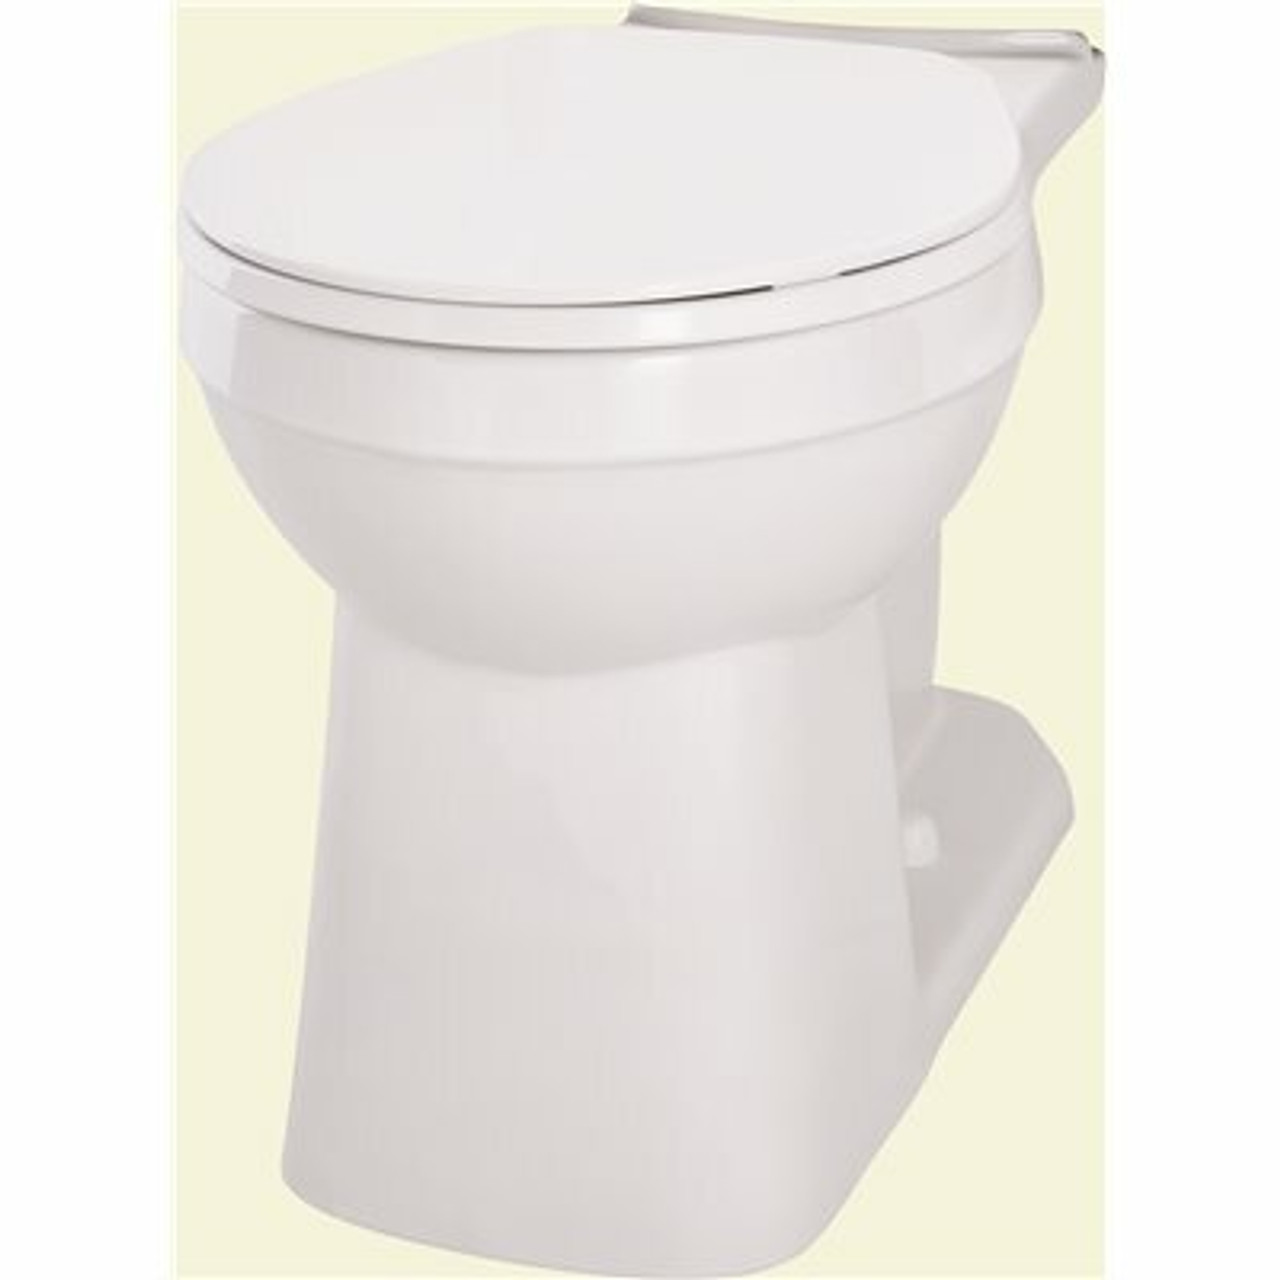 Gerber Plumbing Avalanche Elite 1.28/1.6 Gpf Ada Round Front Toilet Bowl Only In White